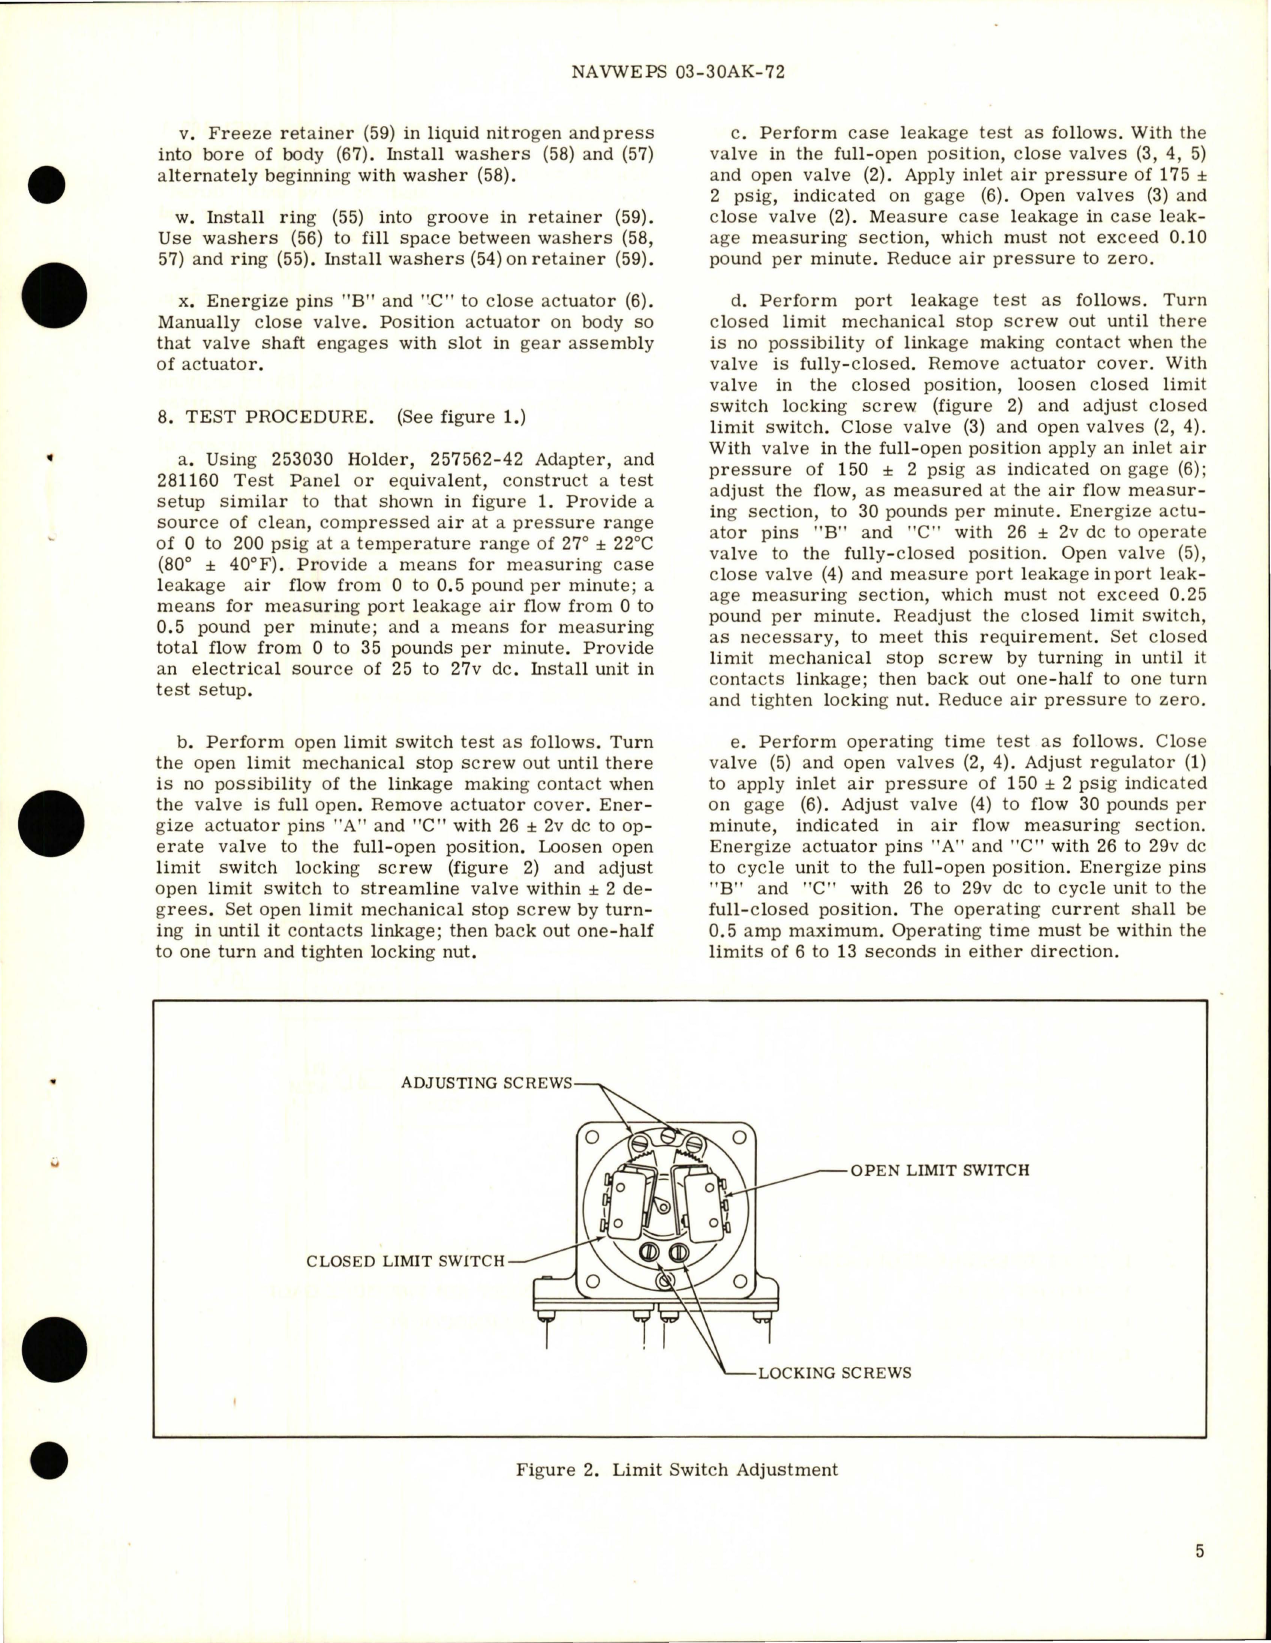 Sample page 7 from AirCorps Library document: Overhaul Instructions with Parts Breakdown for 1